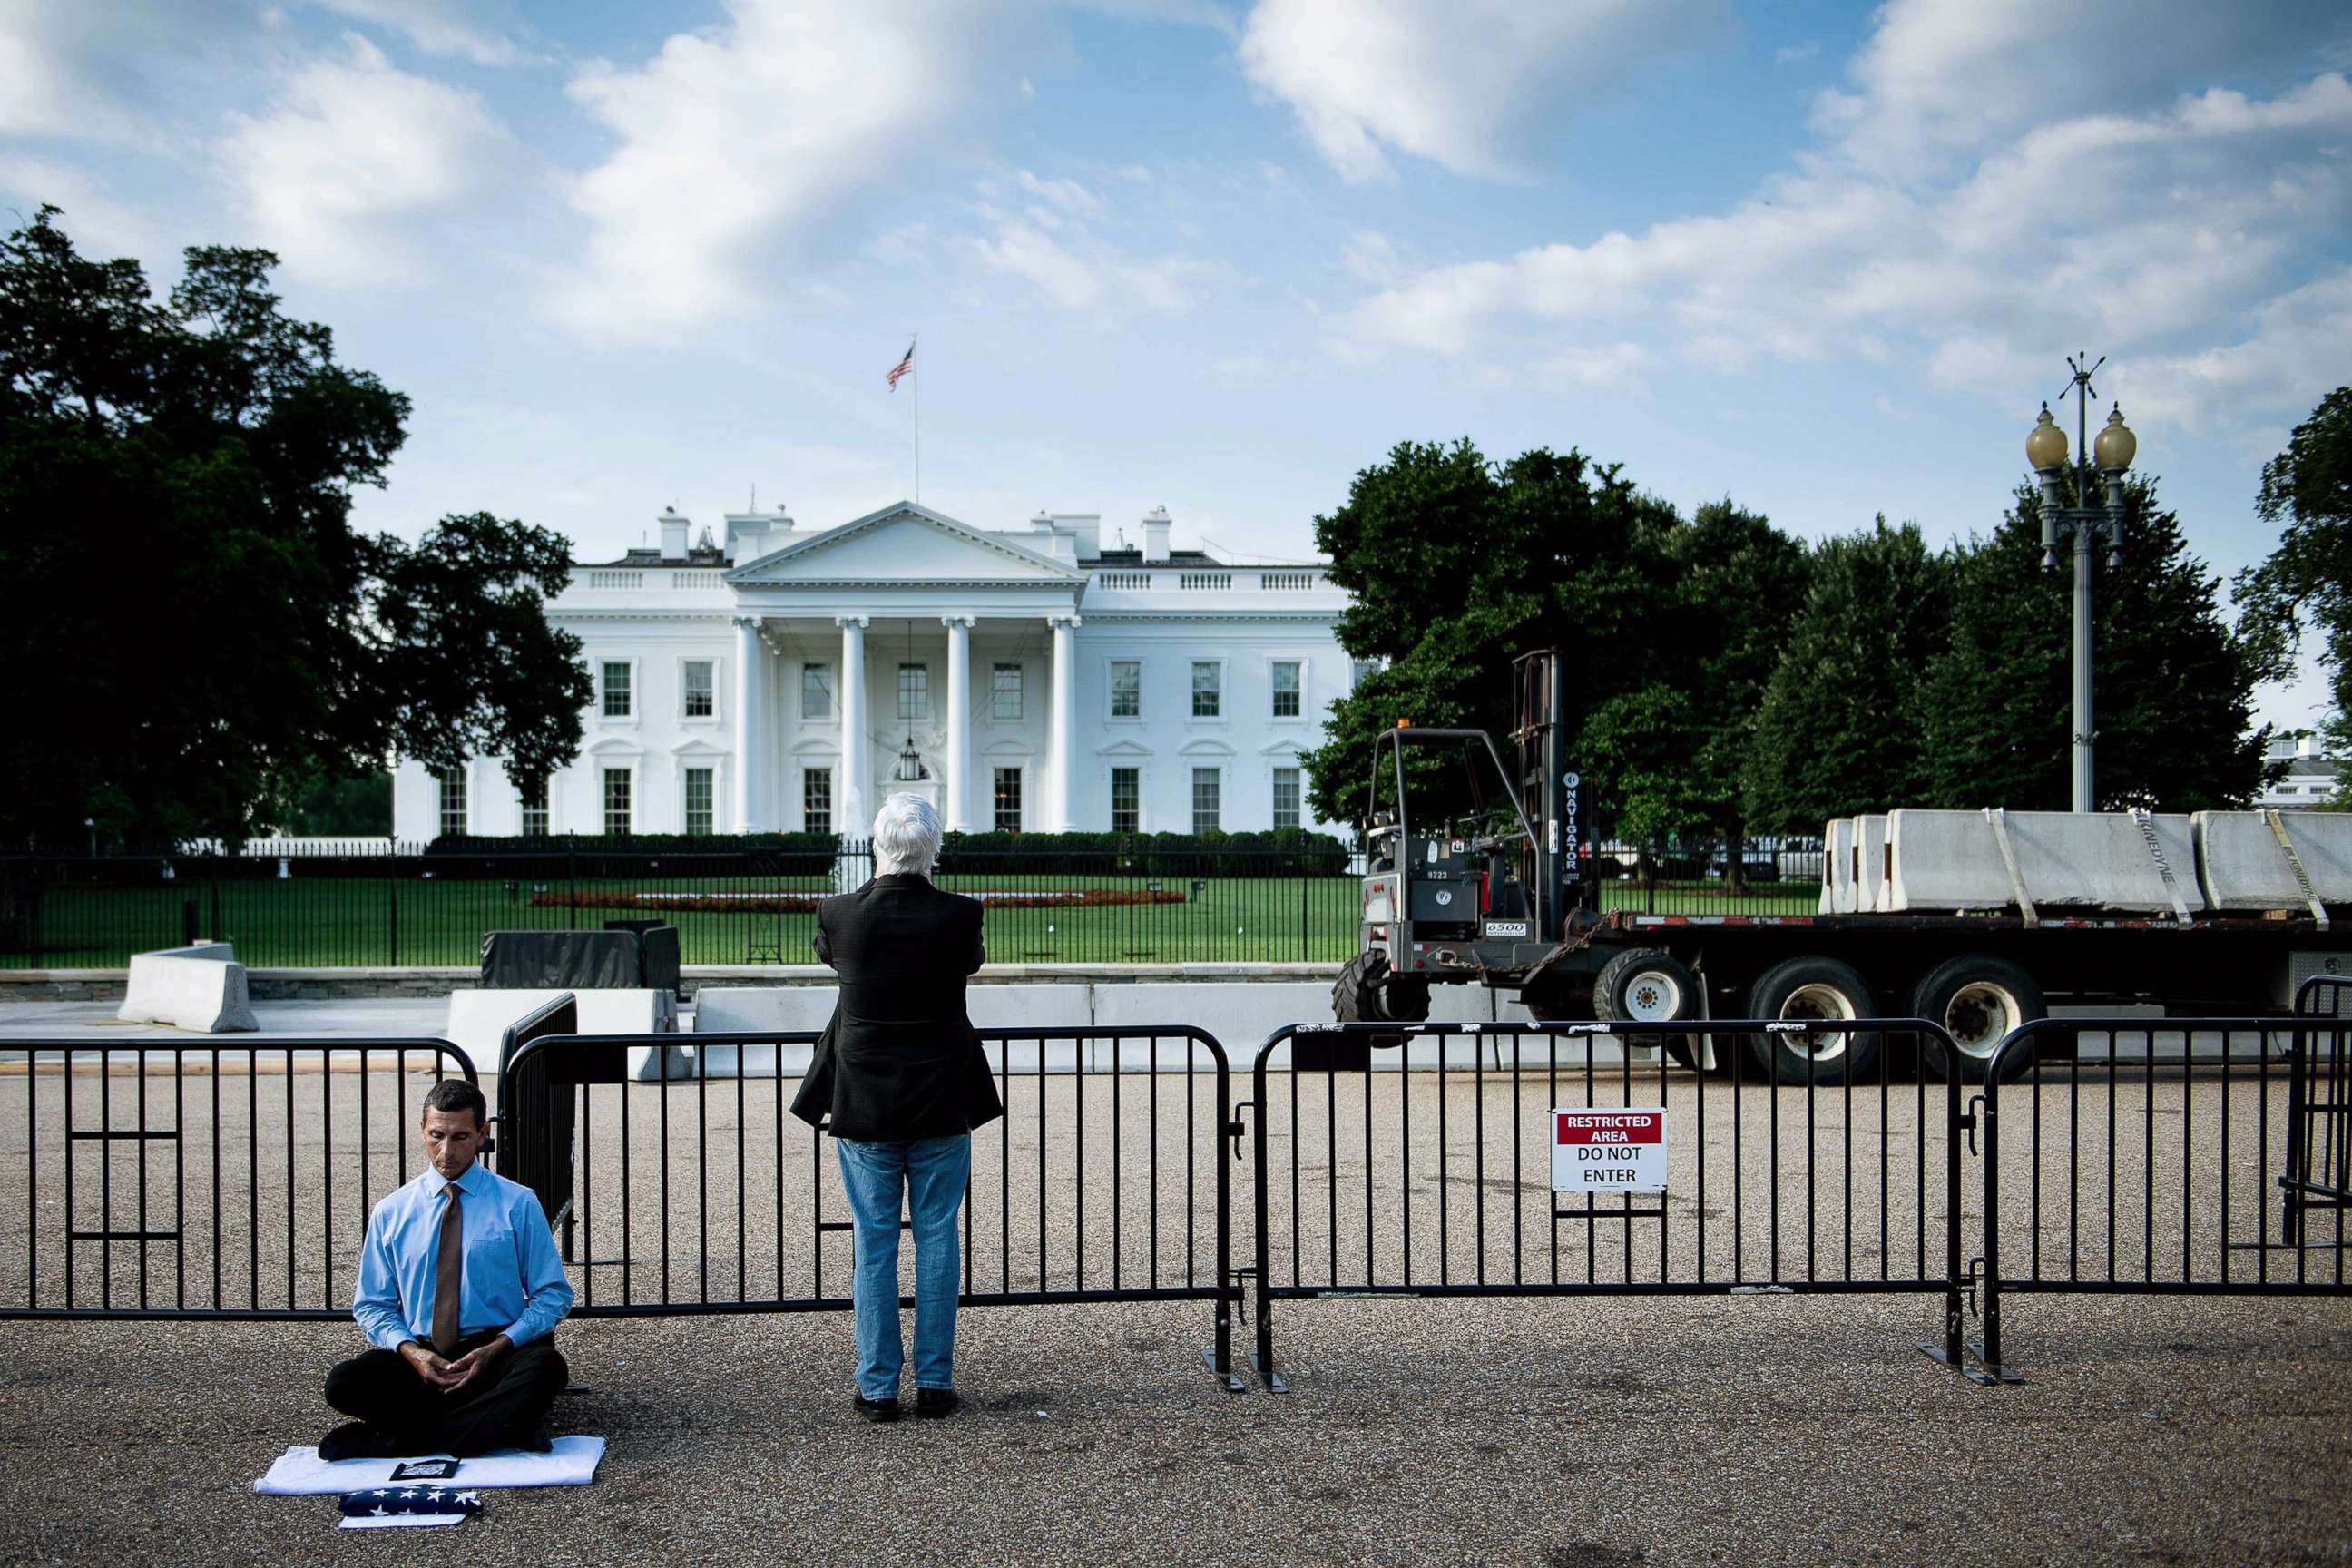 PHOTO: Preparations are made to modify the fence surrounding the White House, July 12, 2019, in Washington, D.C.